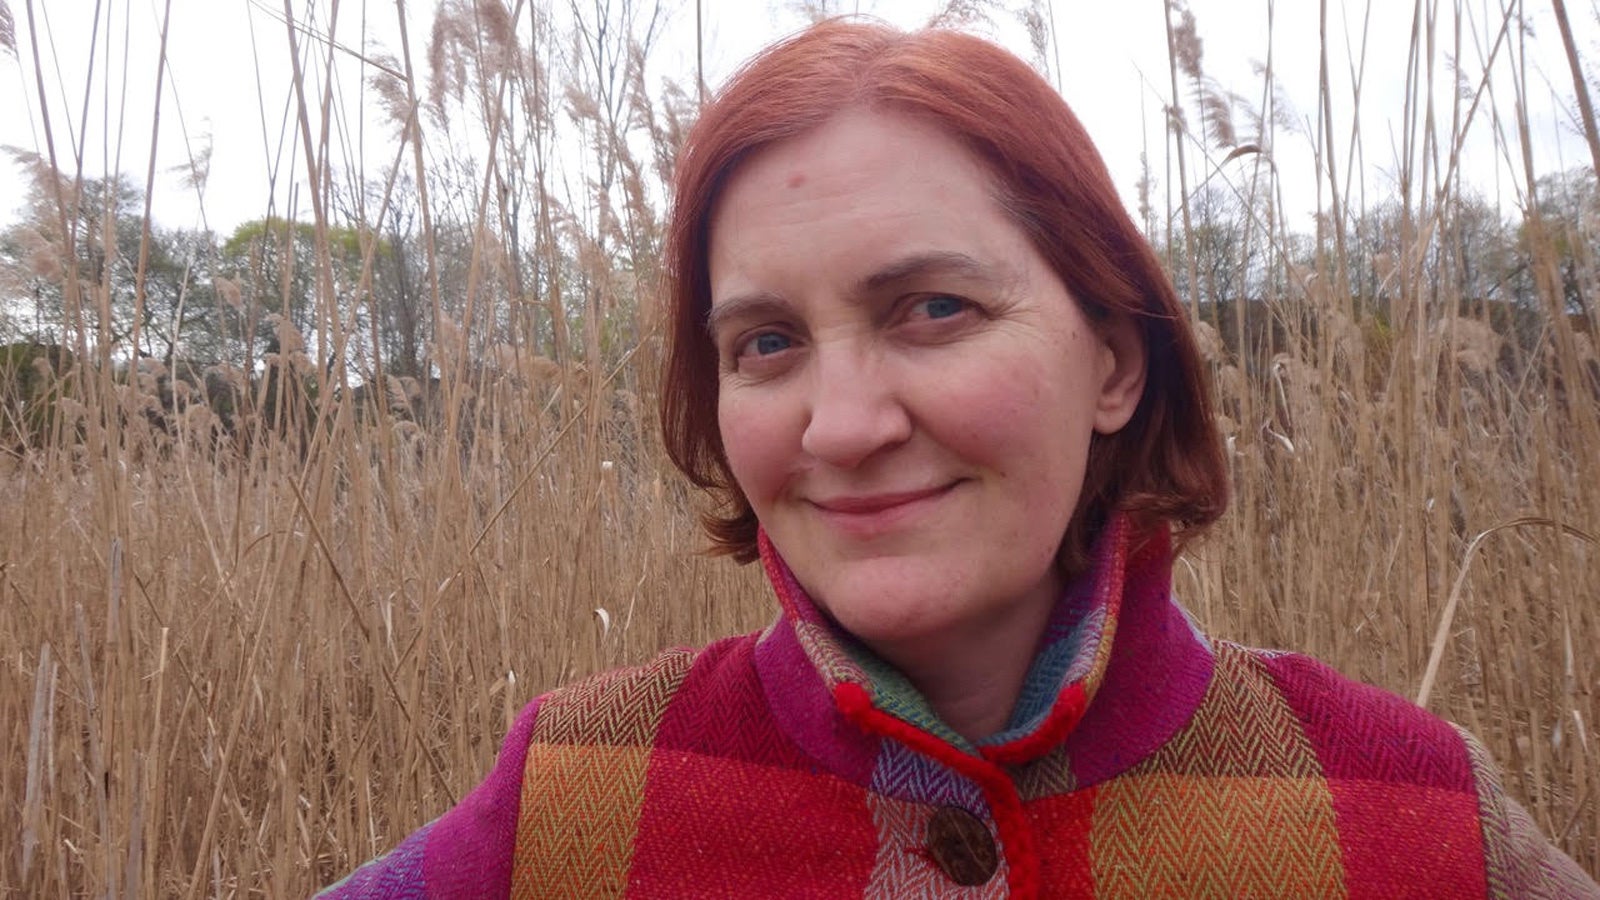 Emma Donoghue smiles in a field of long grass